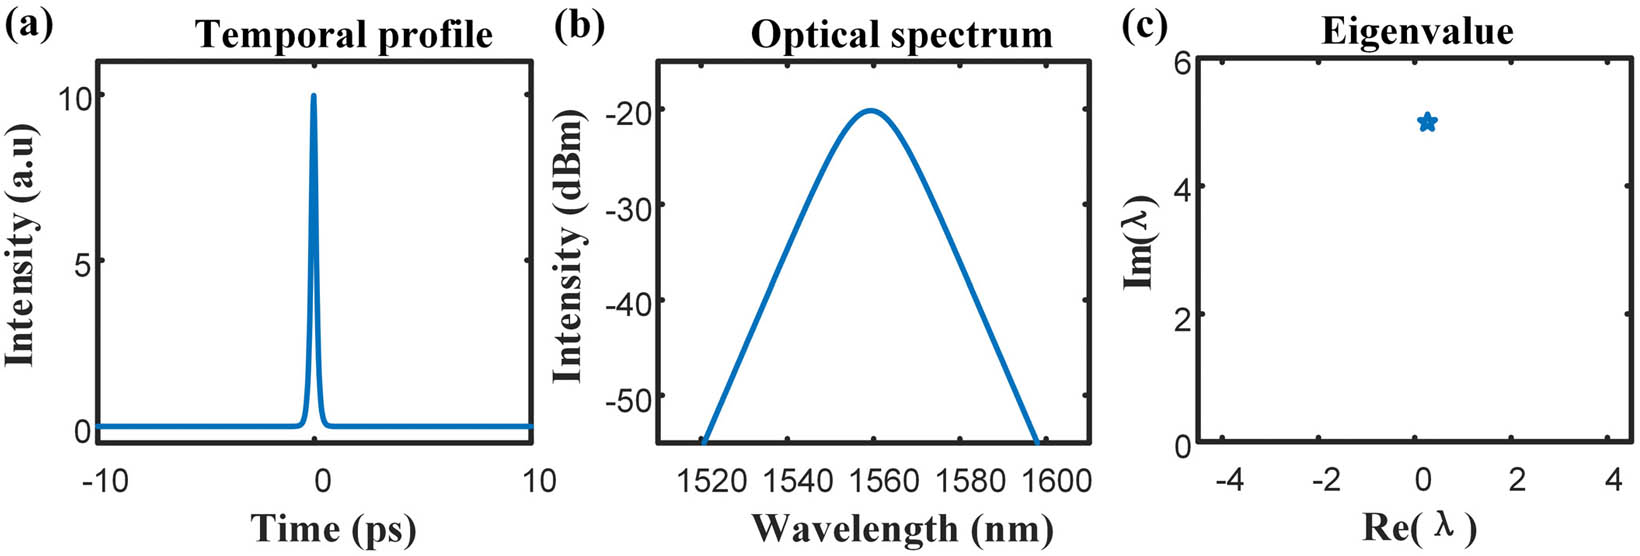 (a) Temporal profile, (b) optical spectrum, and (c) eigenvalue of the filtered soliton.